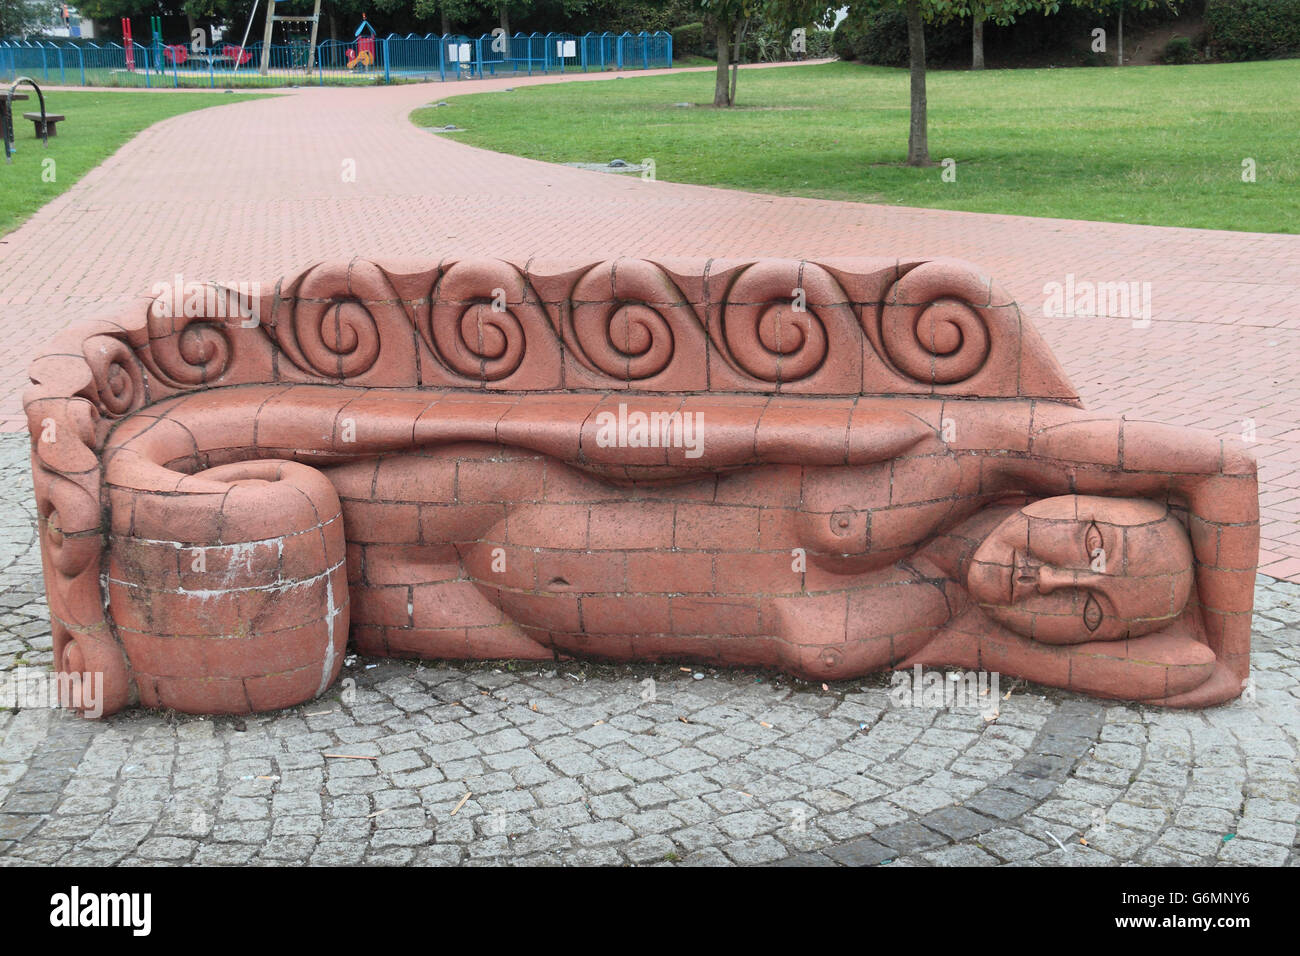 'Female Beastie Bench' by Gwen Heeney, one of a series of nine Beastie Benches in brick, Cardiff Bay, Glamorgan, Wales. Stock Photo